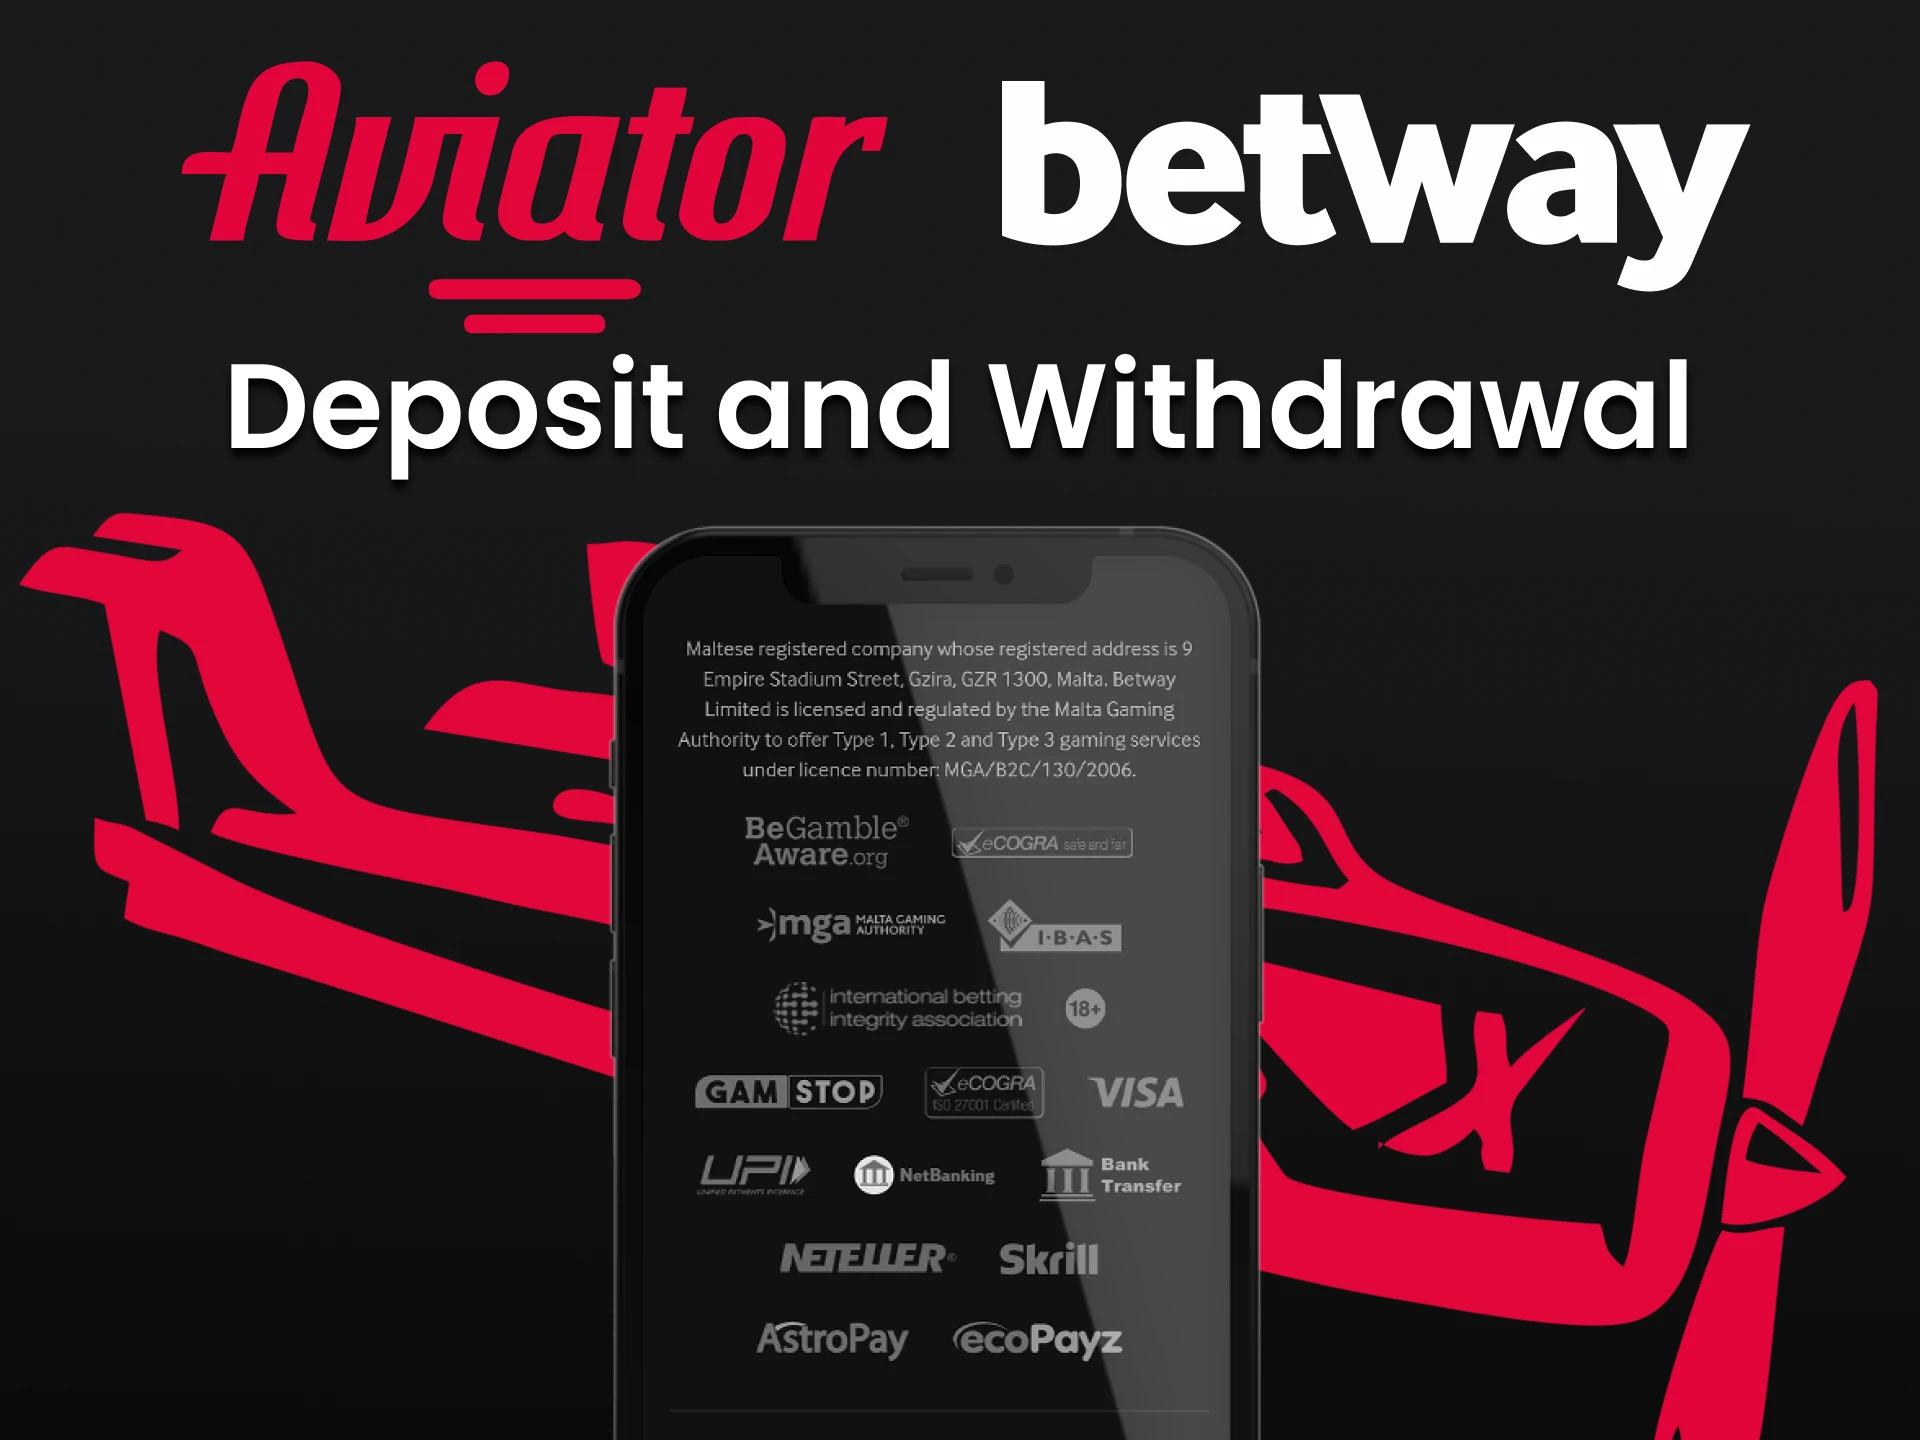 Top up your deposit to play Aviator by Betway.